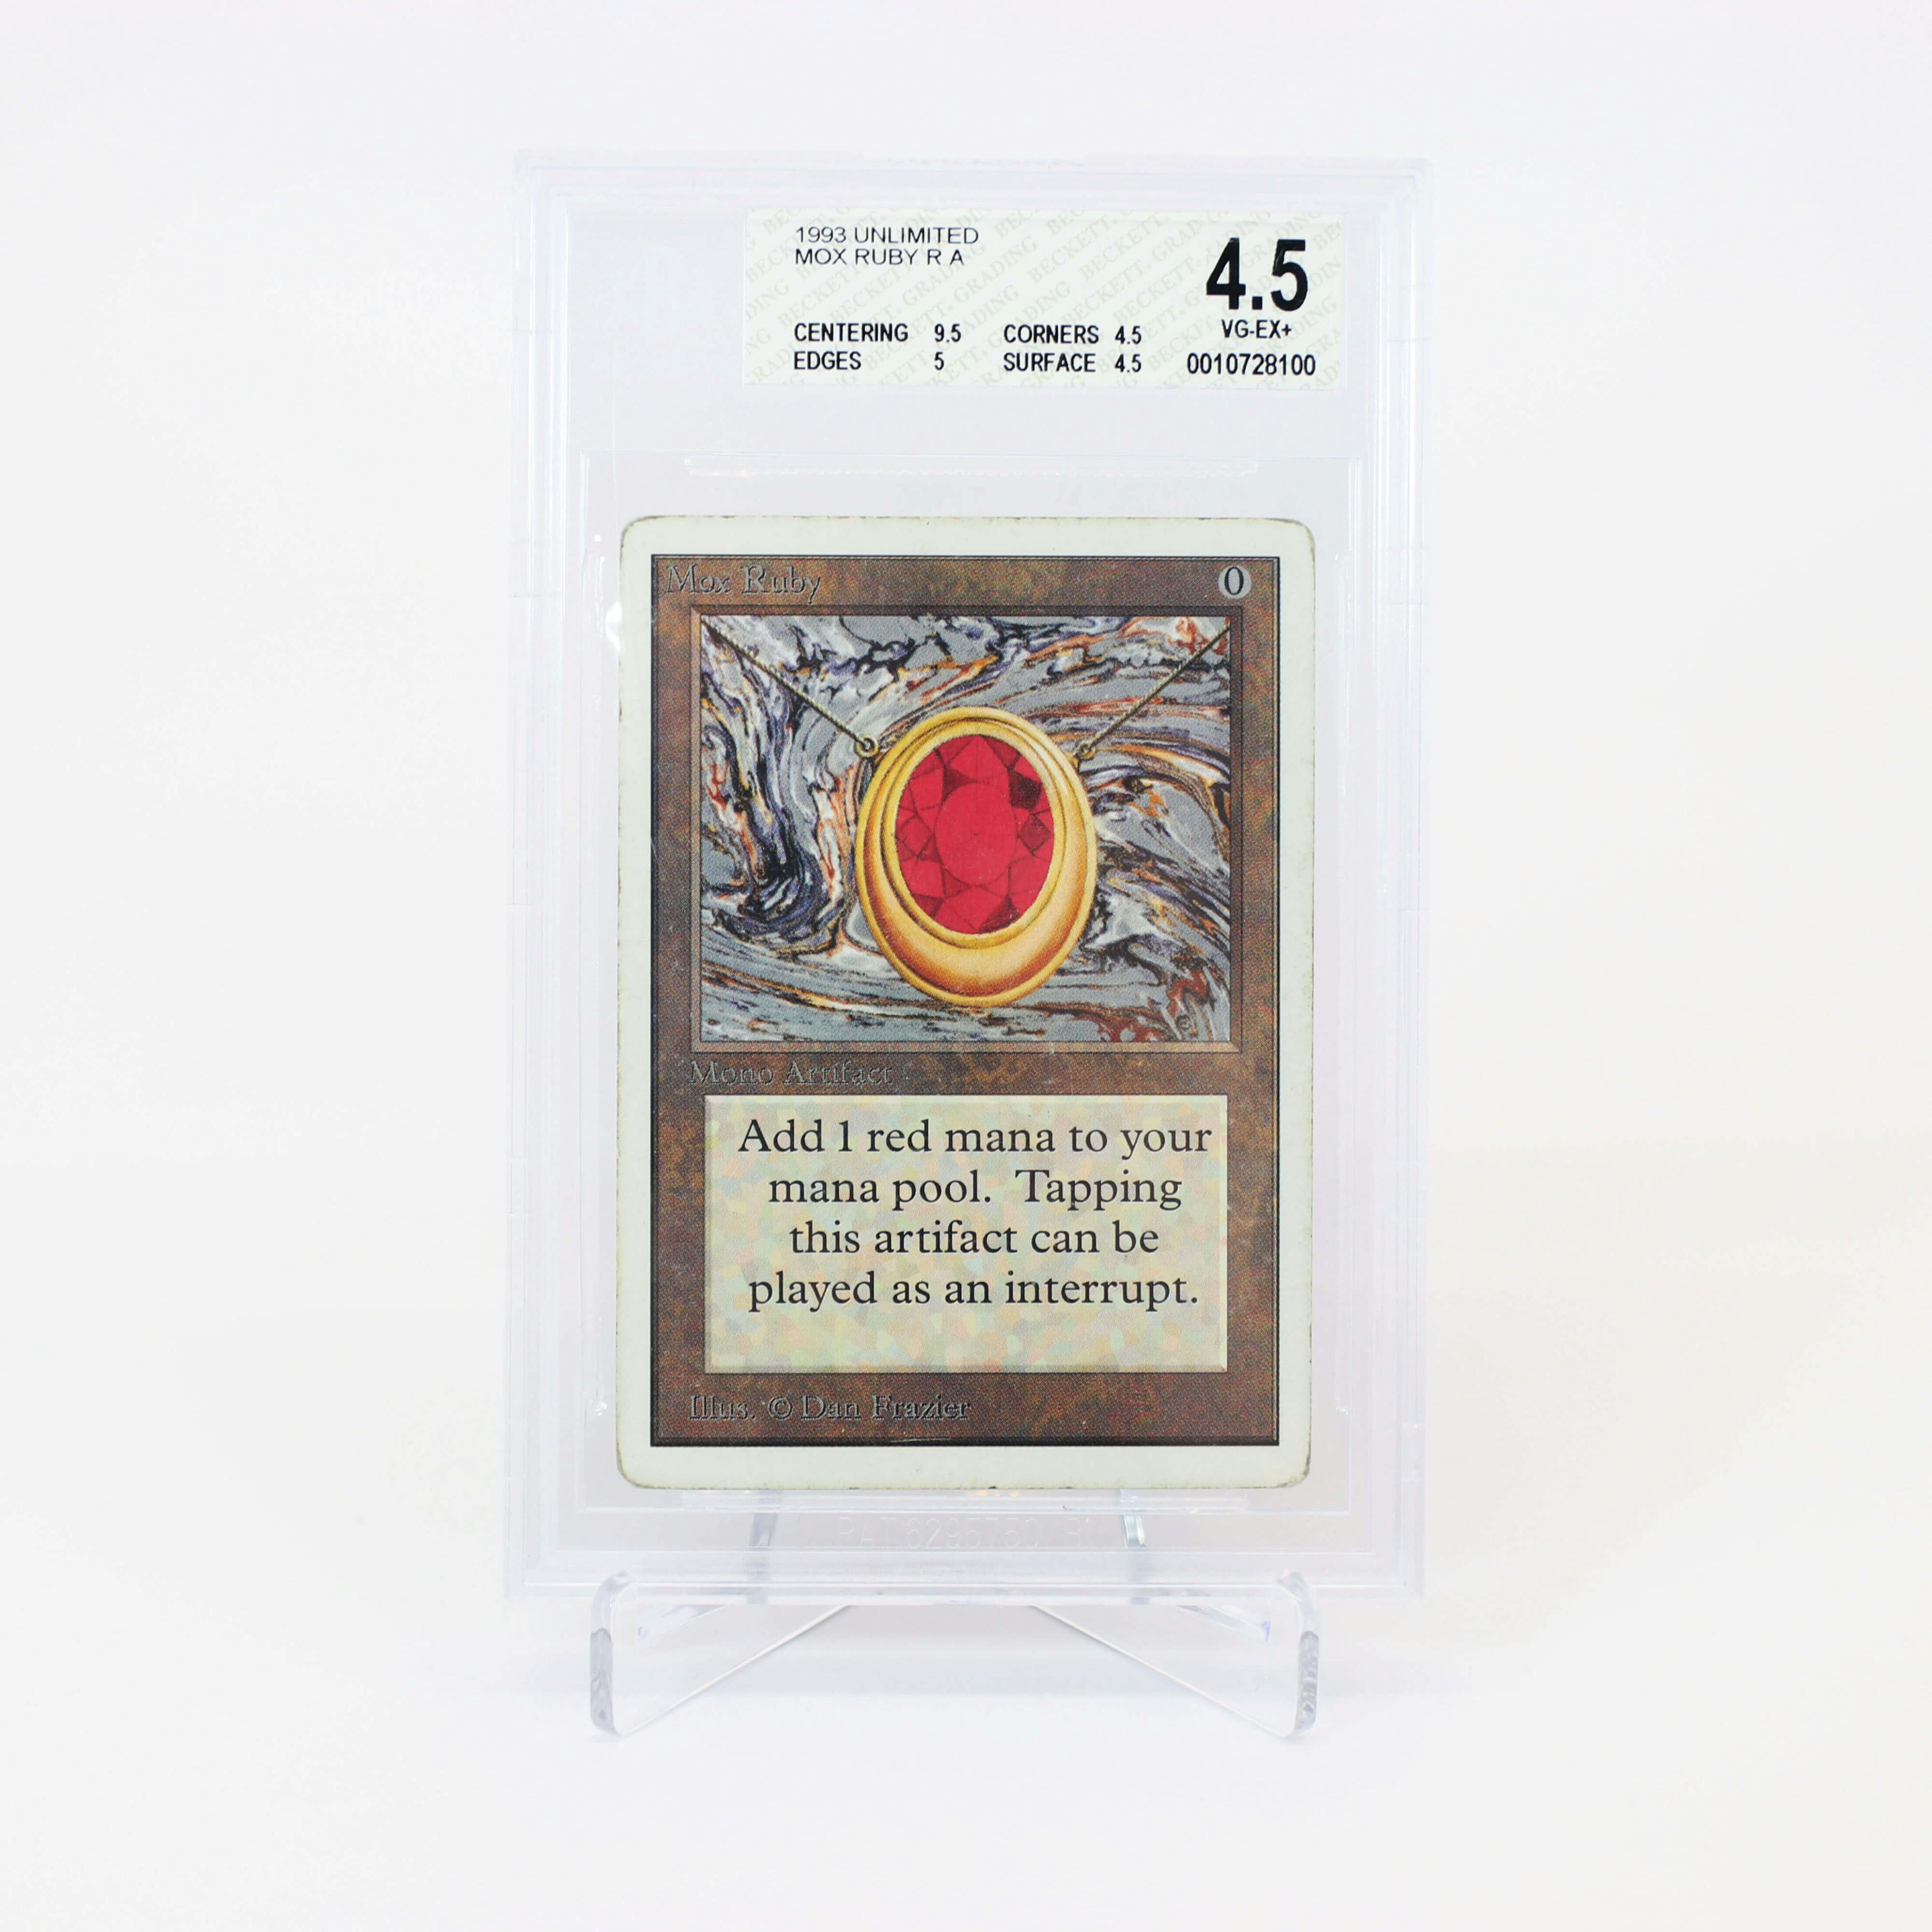 Magic: The Gathering Mox Ruby Unlimited BGS 4.5 VG-EX+ 